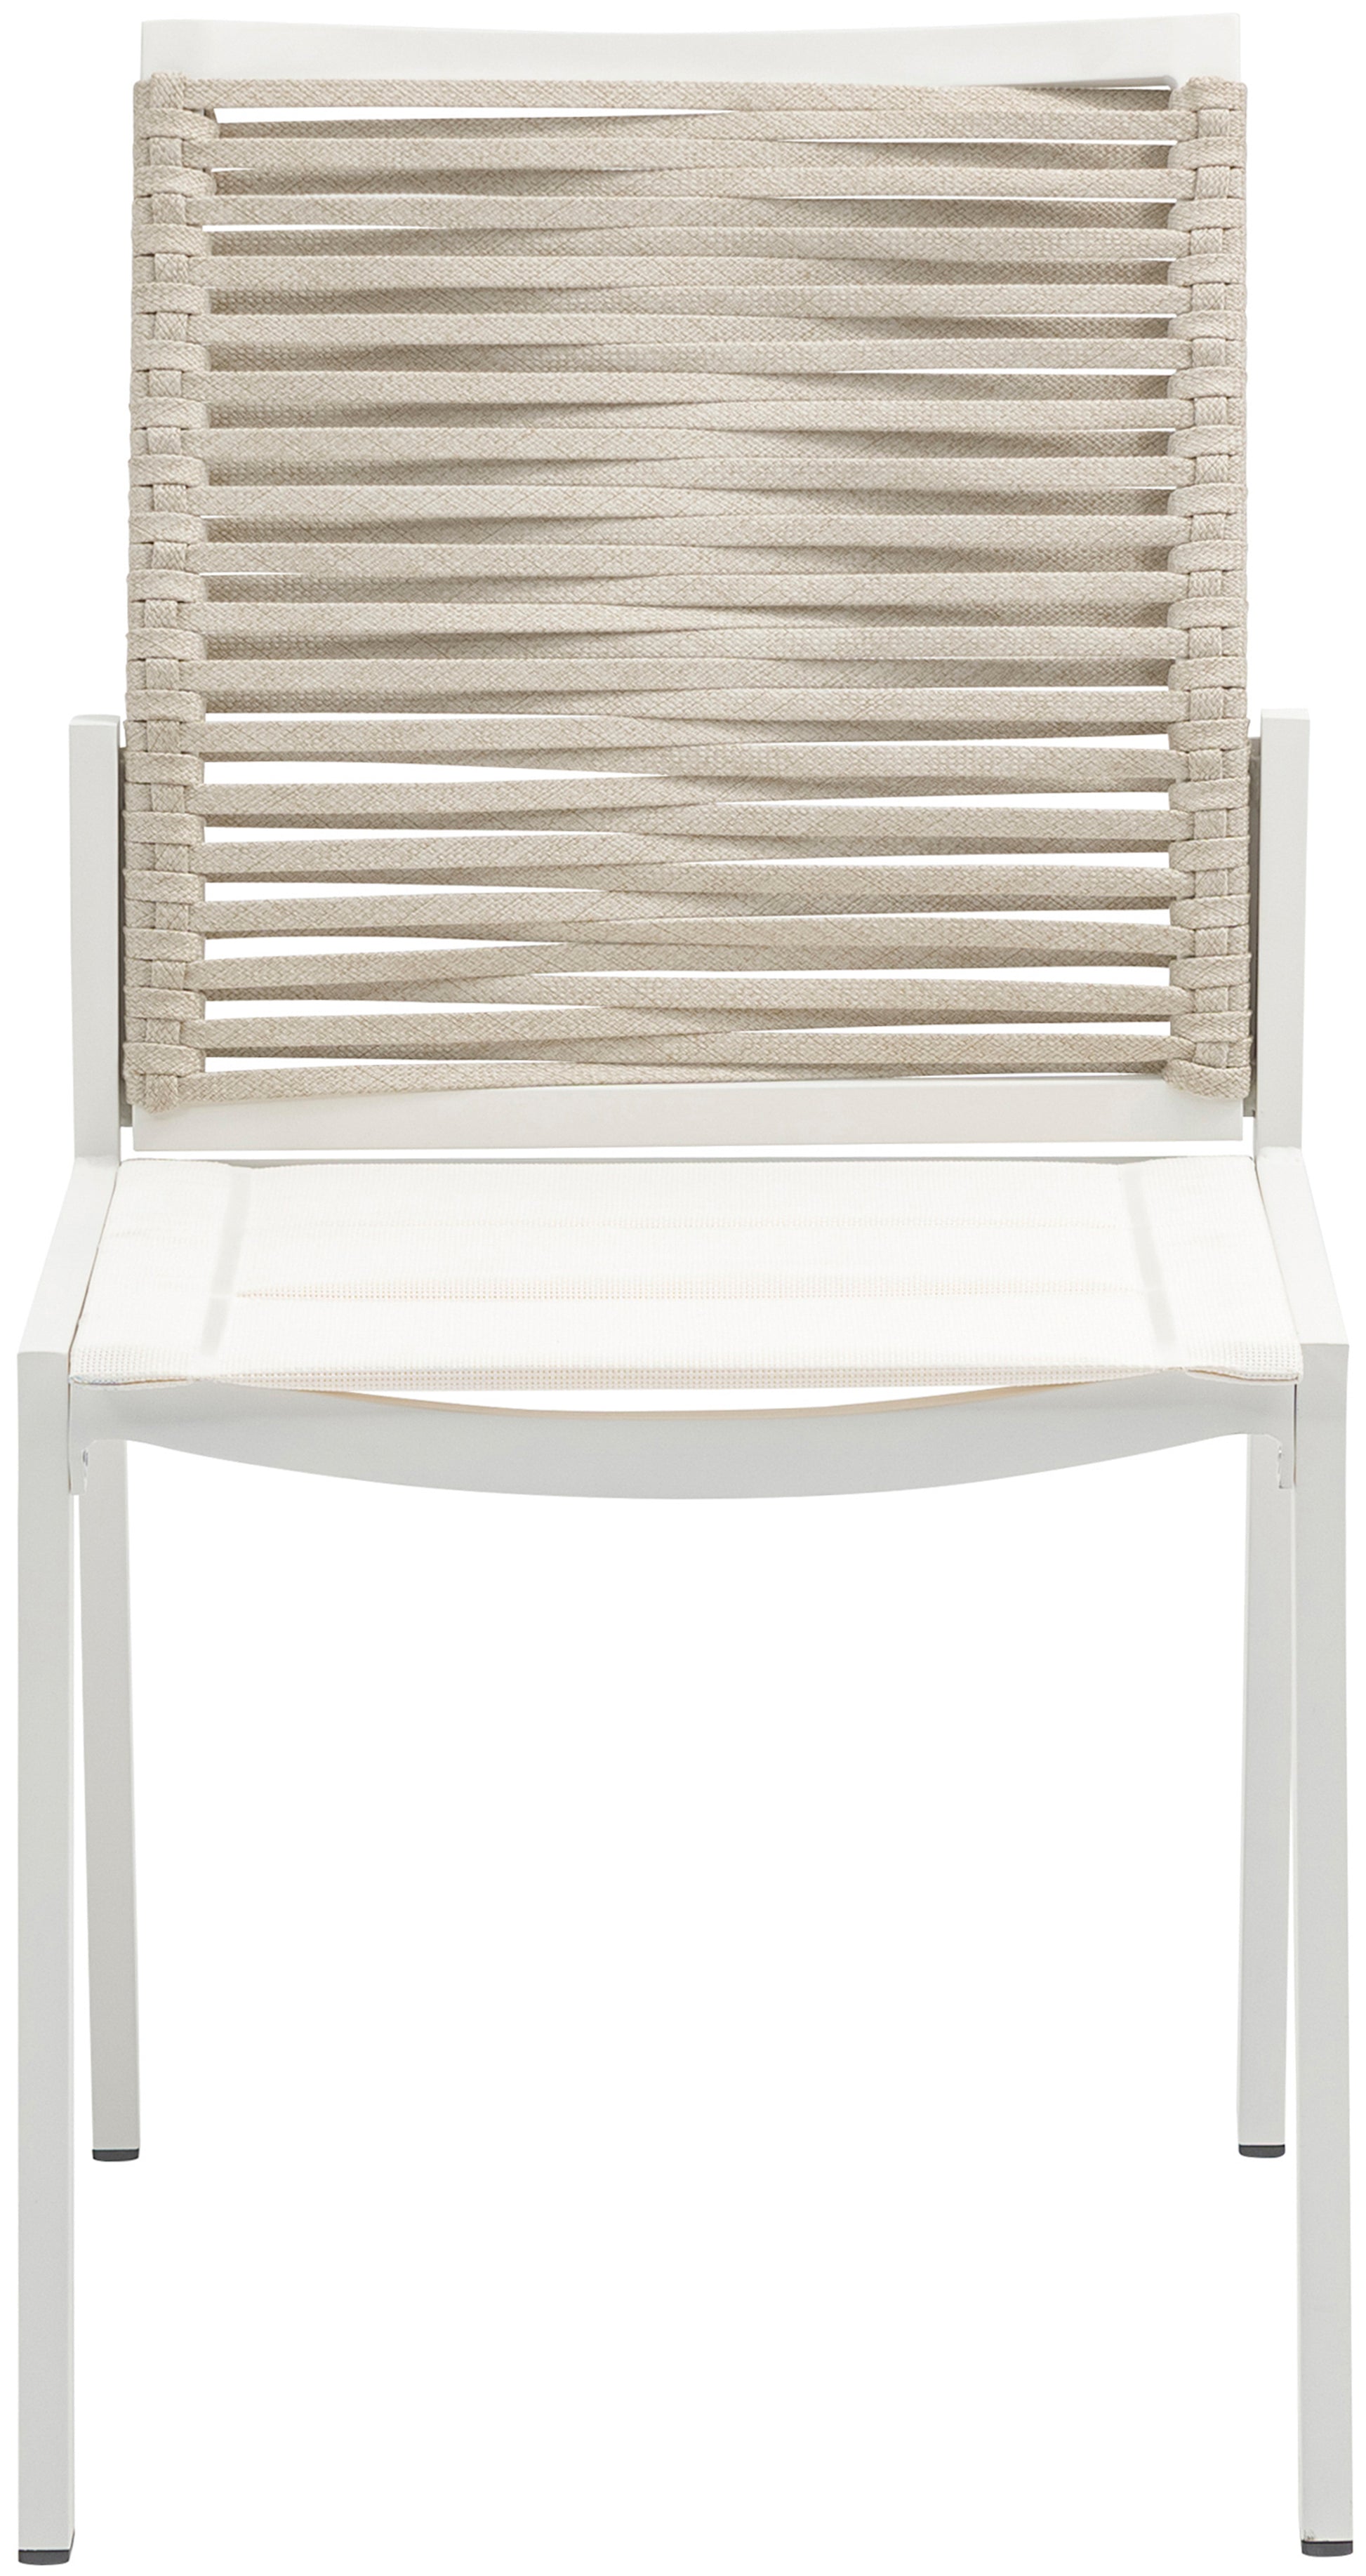 Outdoor Patio Dining Side Chair